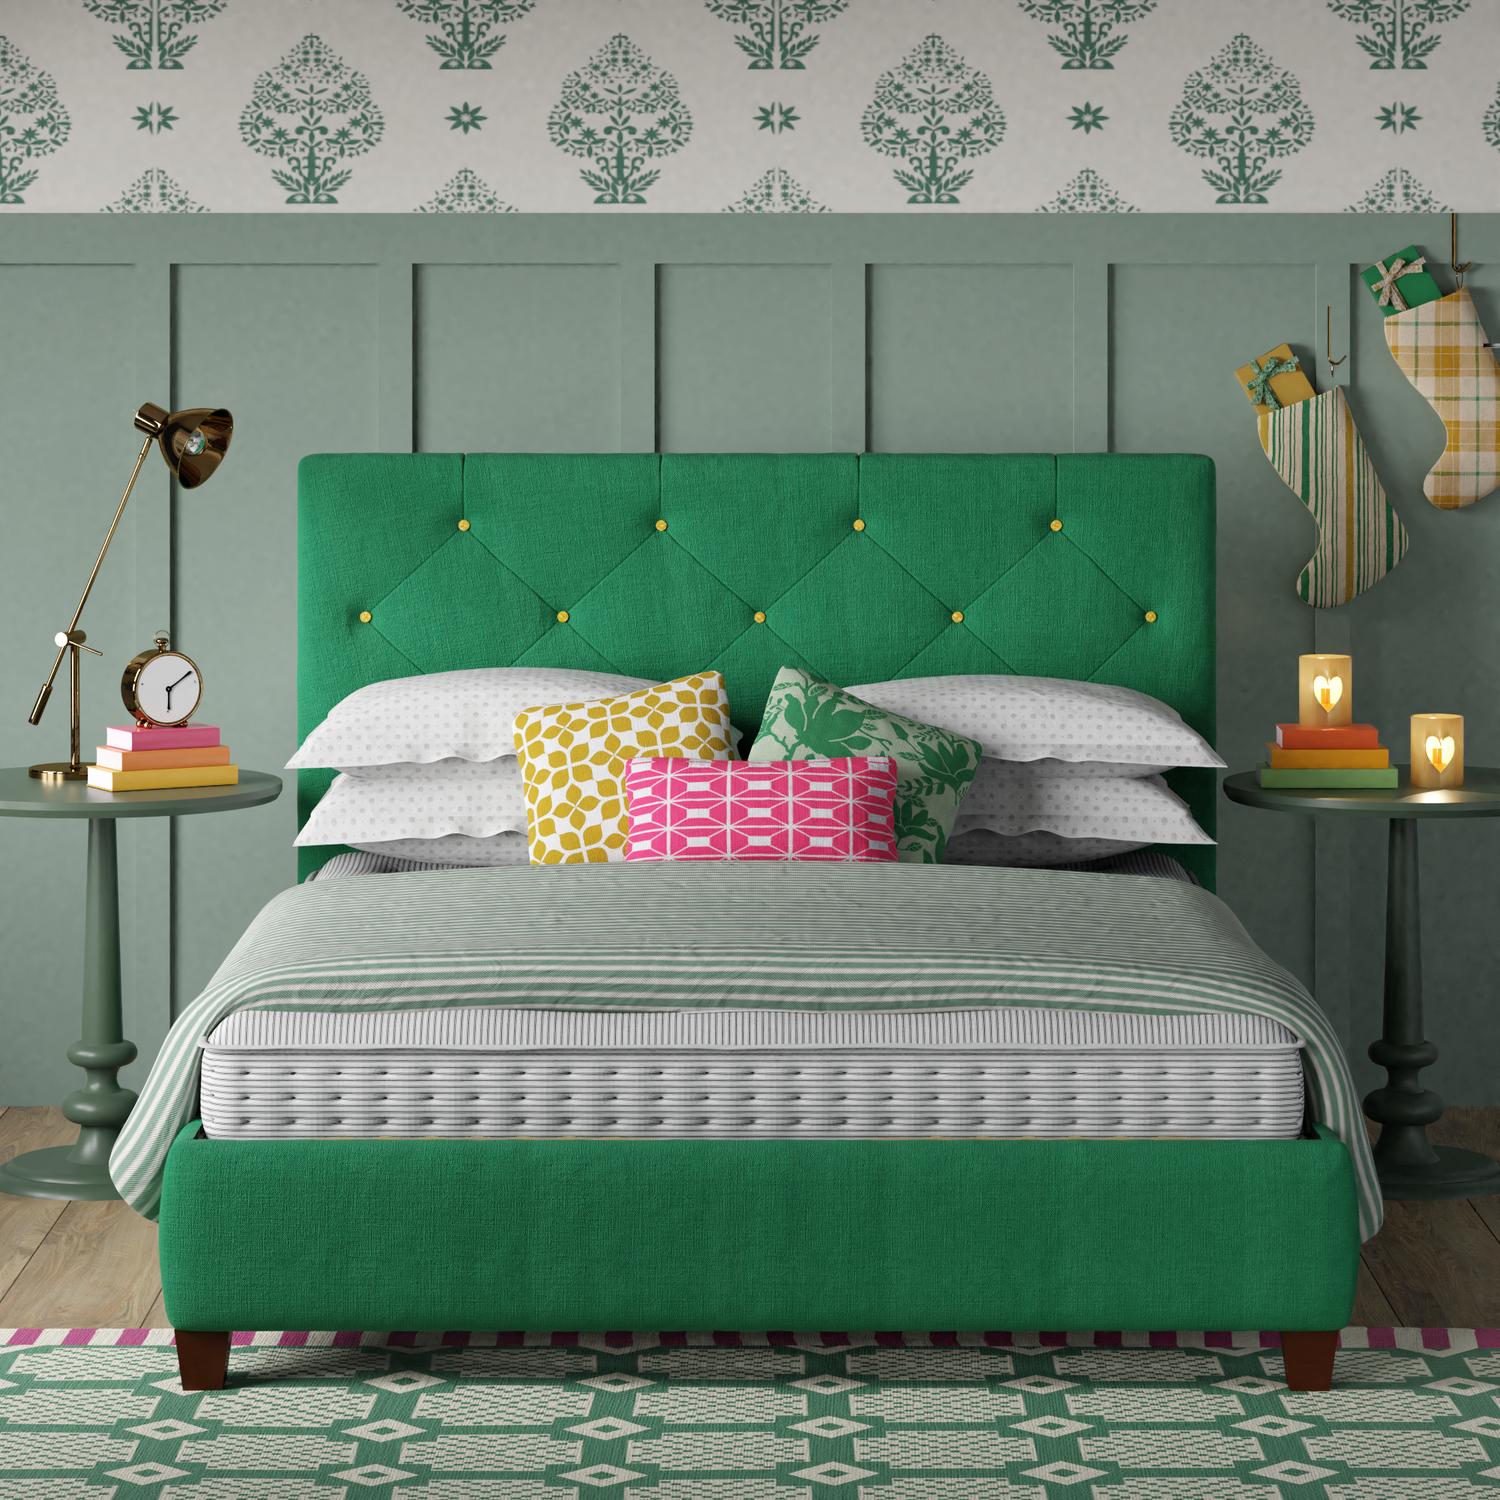 Yushan upholstered bed - Image Green Gold